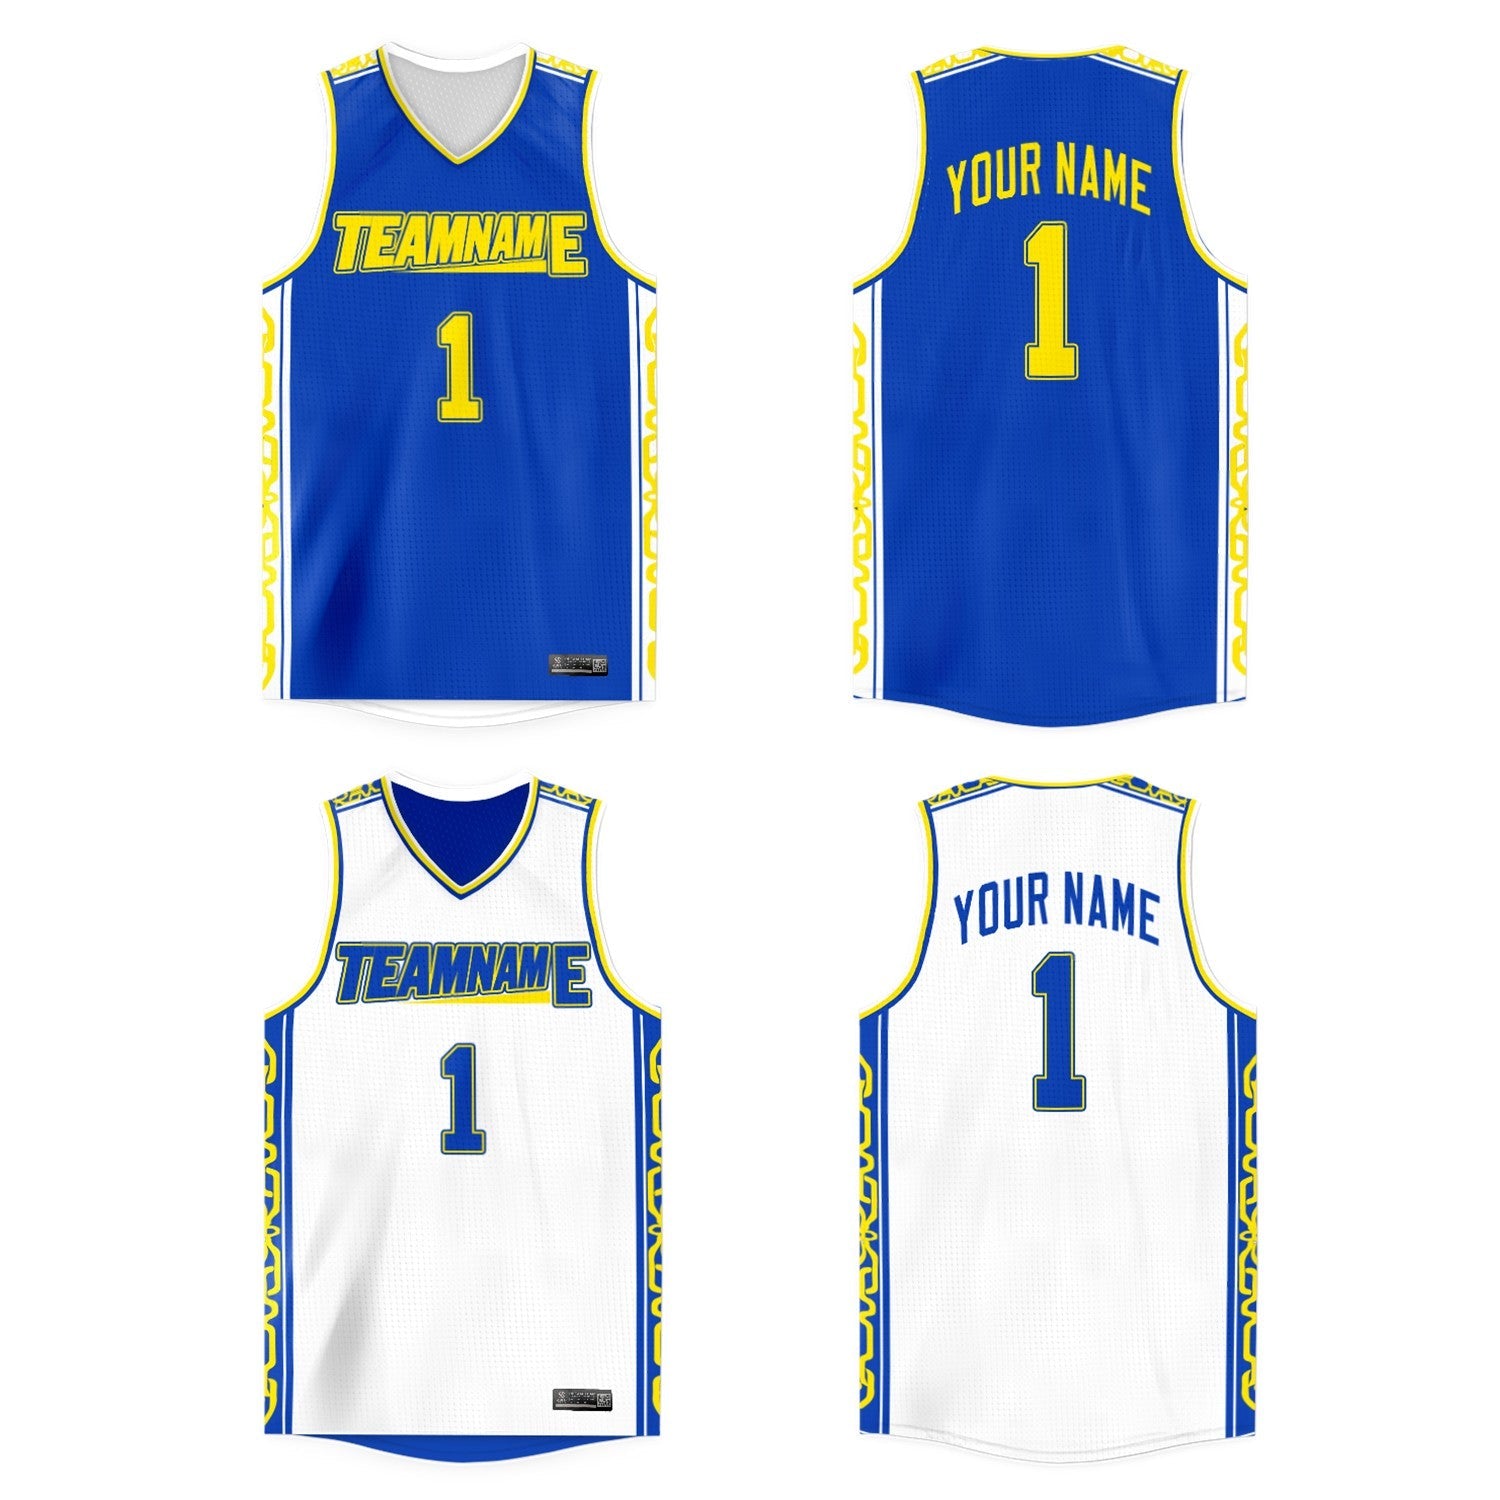 blue and white reversible basketball jerseys